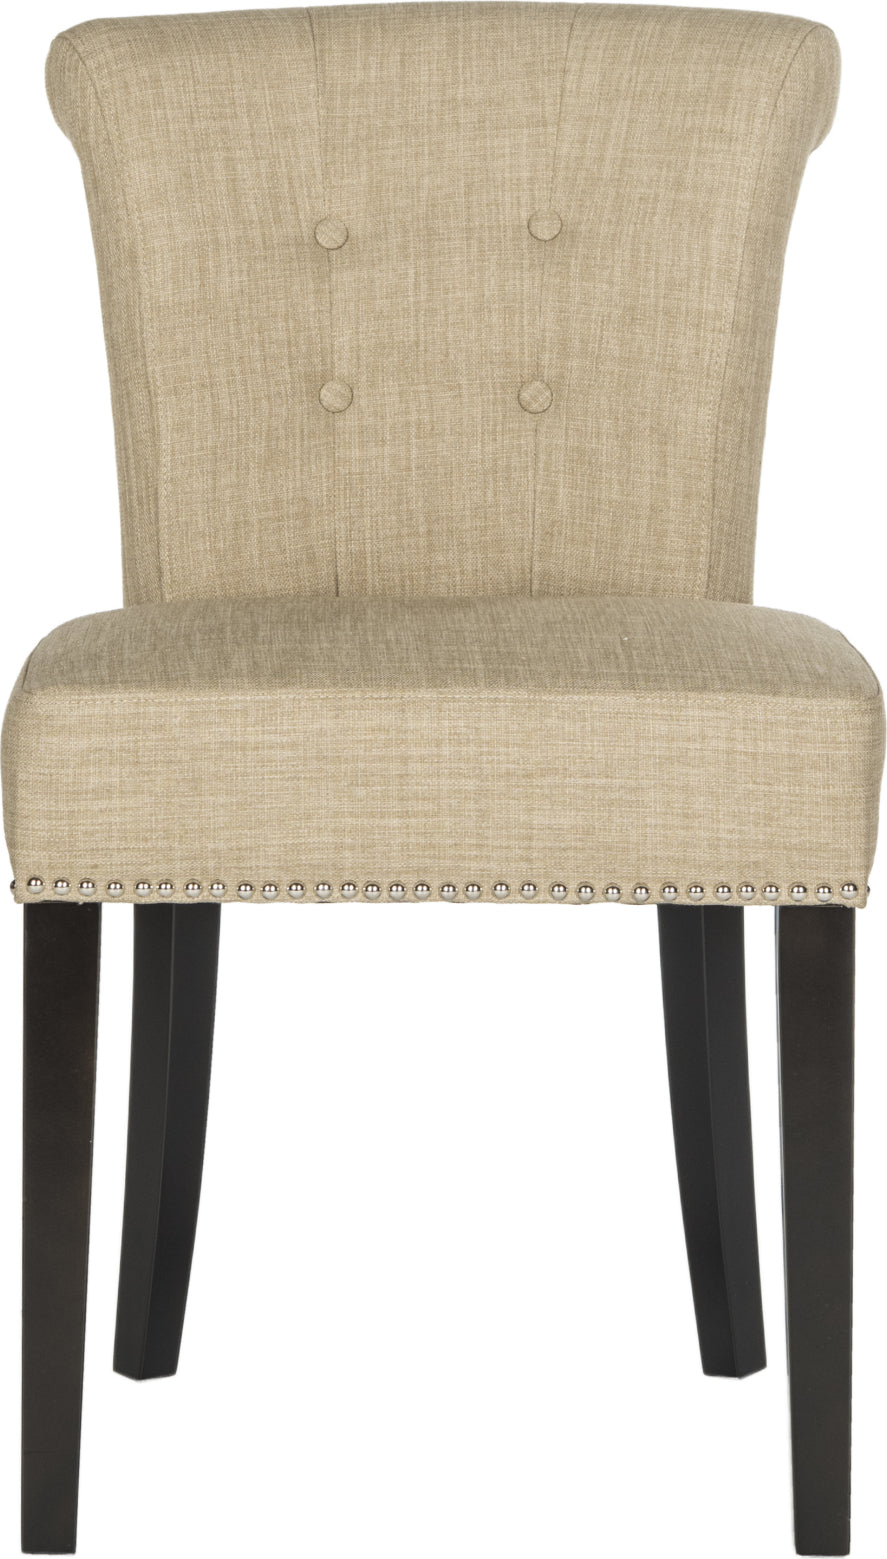 Safavieh Sinclair 21''H Ring Chair (SET Of 2)-Silver Nail Heads Taupe and Espresso Furniture main image